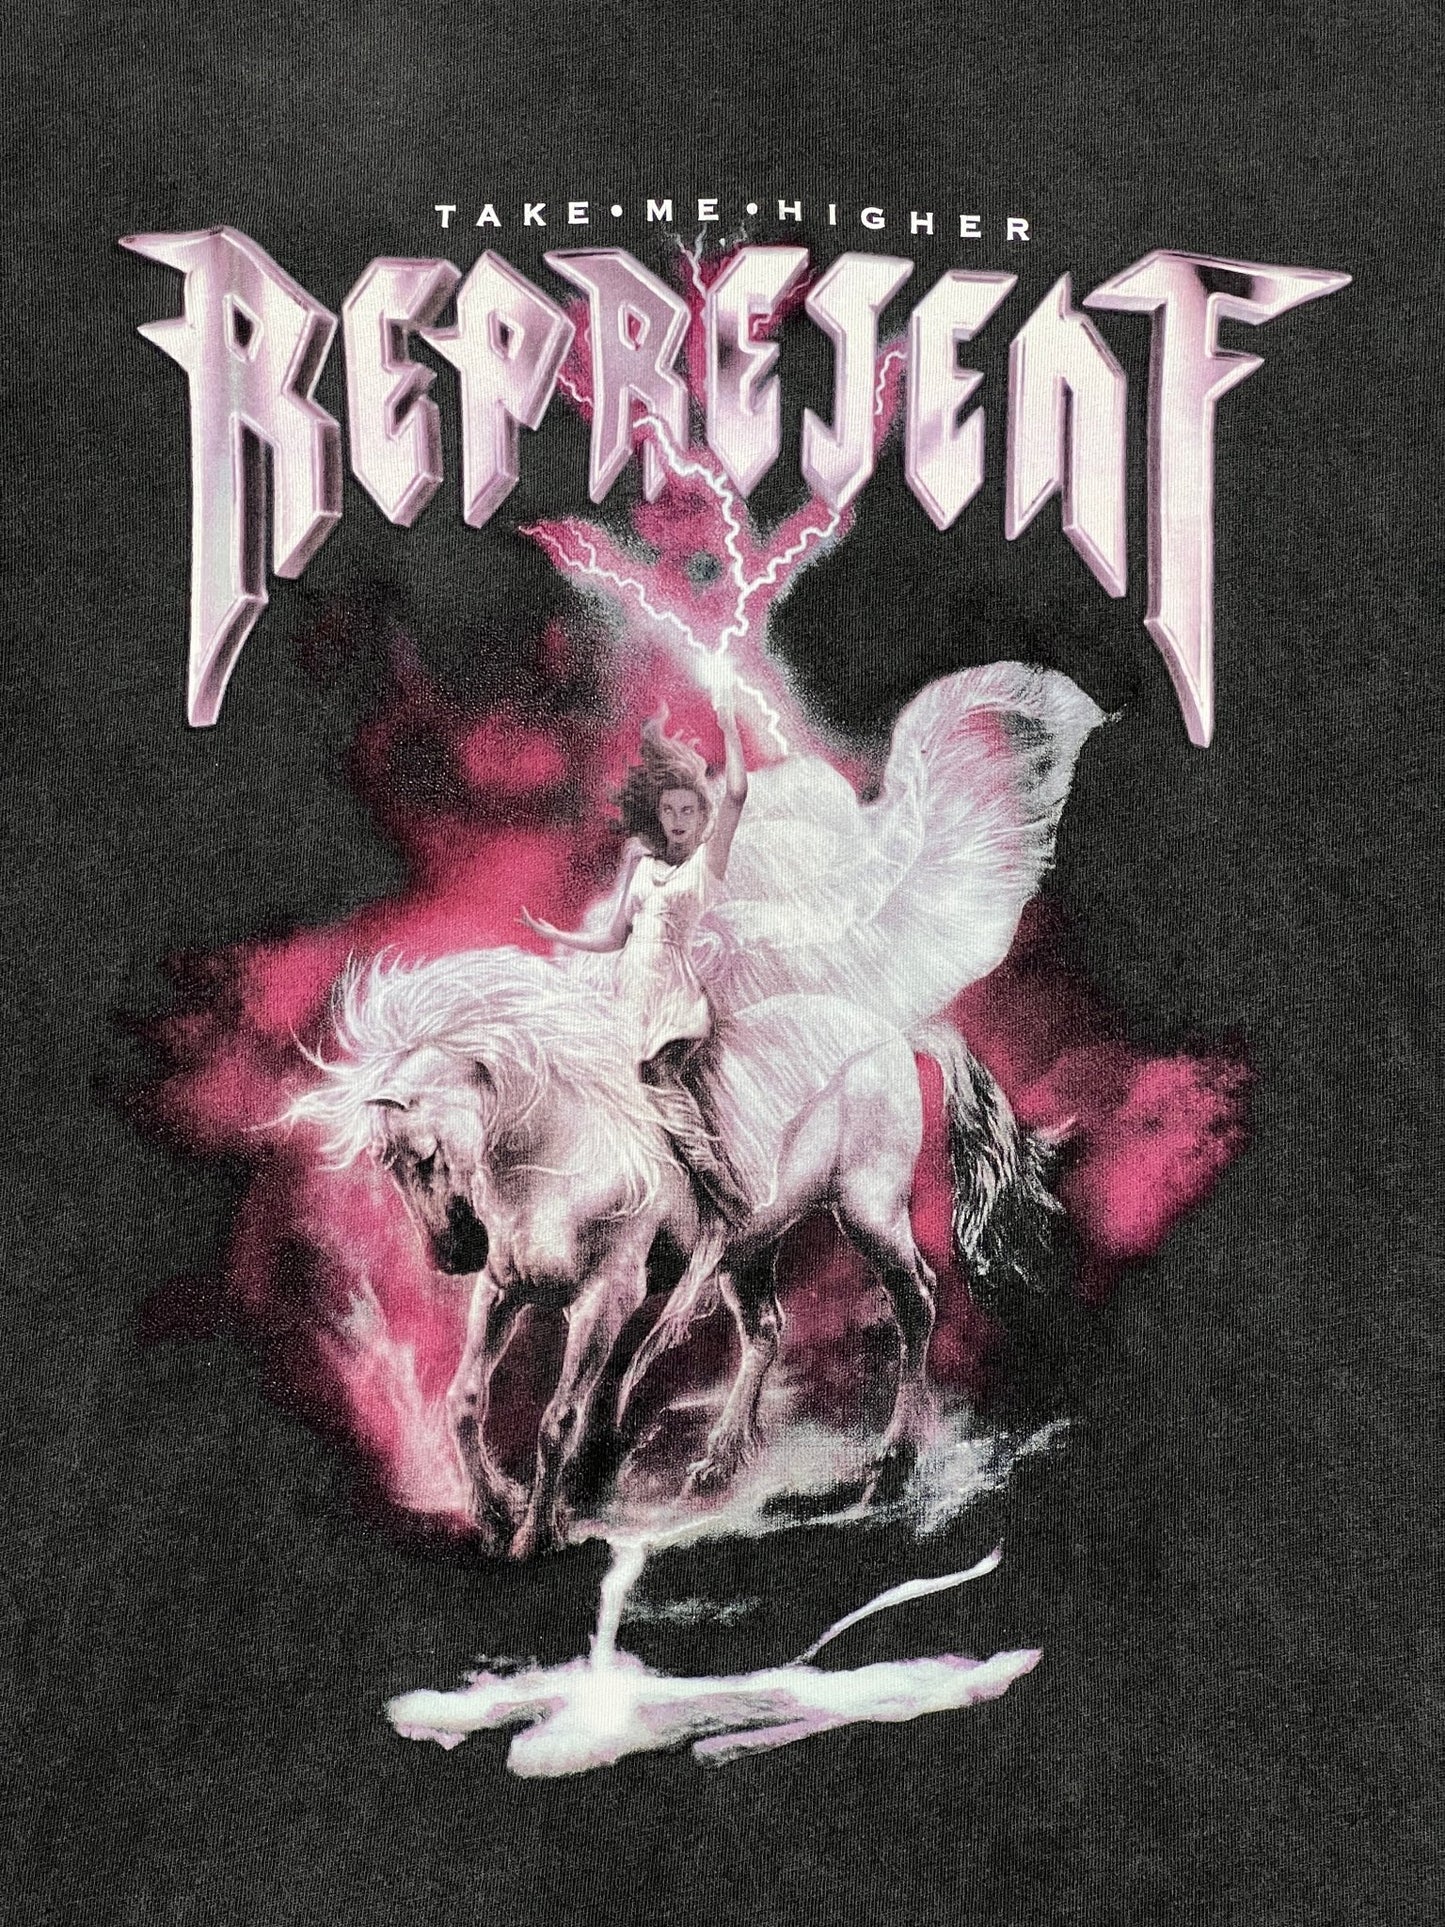 A REPRESENT cotton t-shirt with the words "respect" graphic print on it.